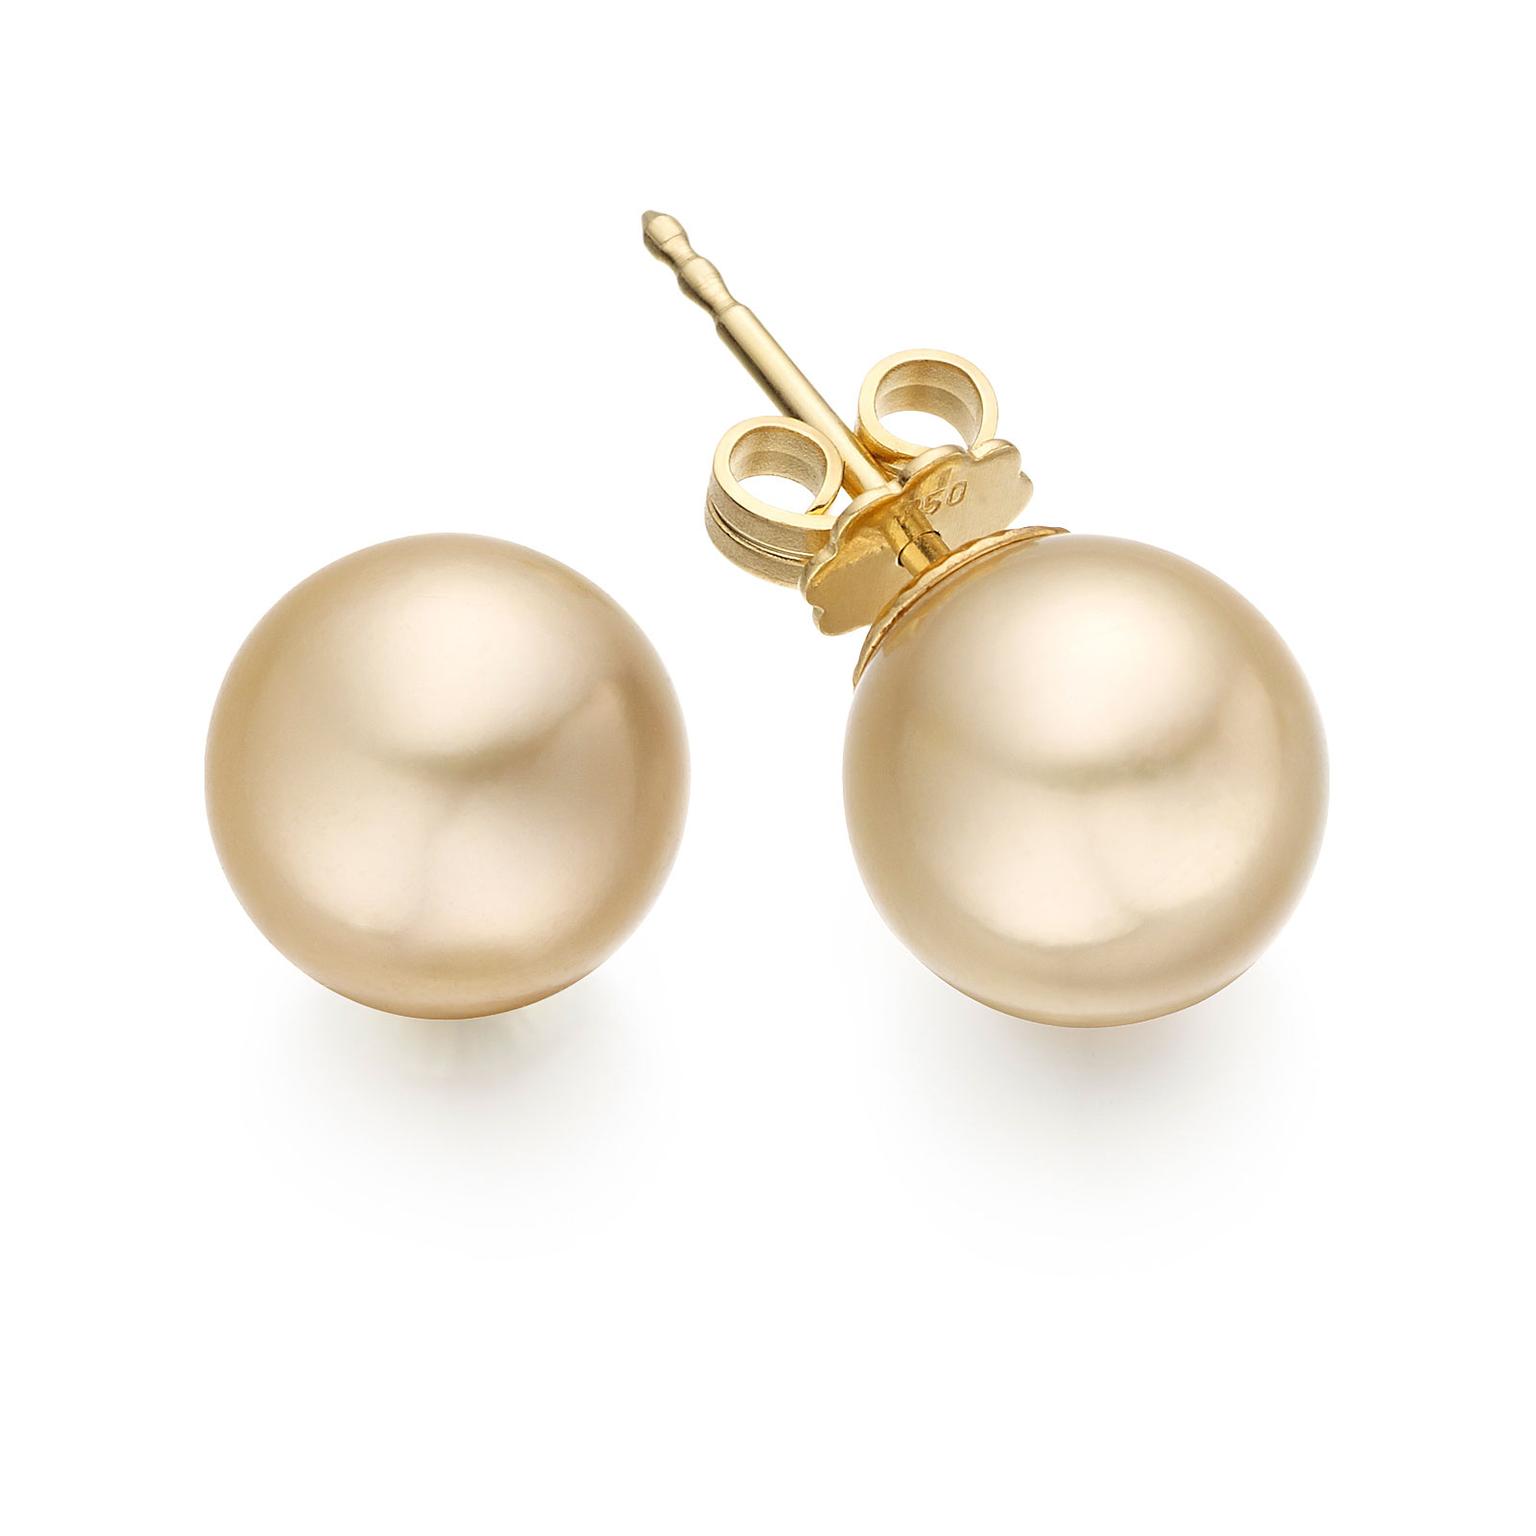 Winterson Pearl stud earrings in 18ct yellow gold set with golden South Sea pearls